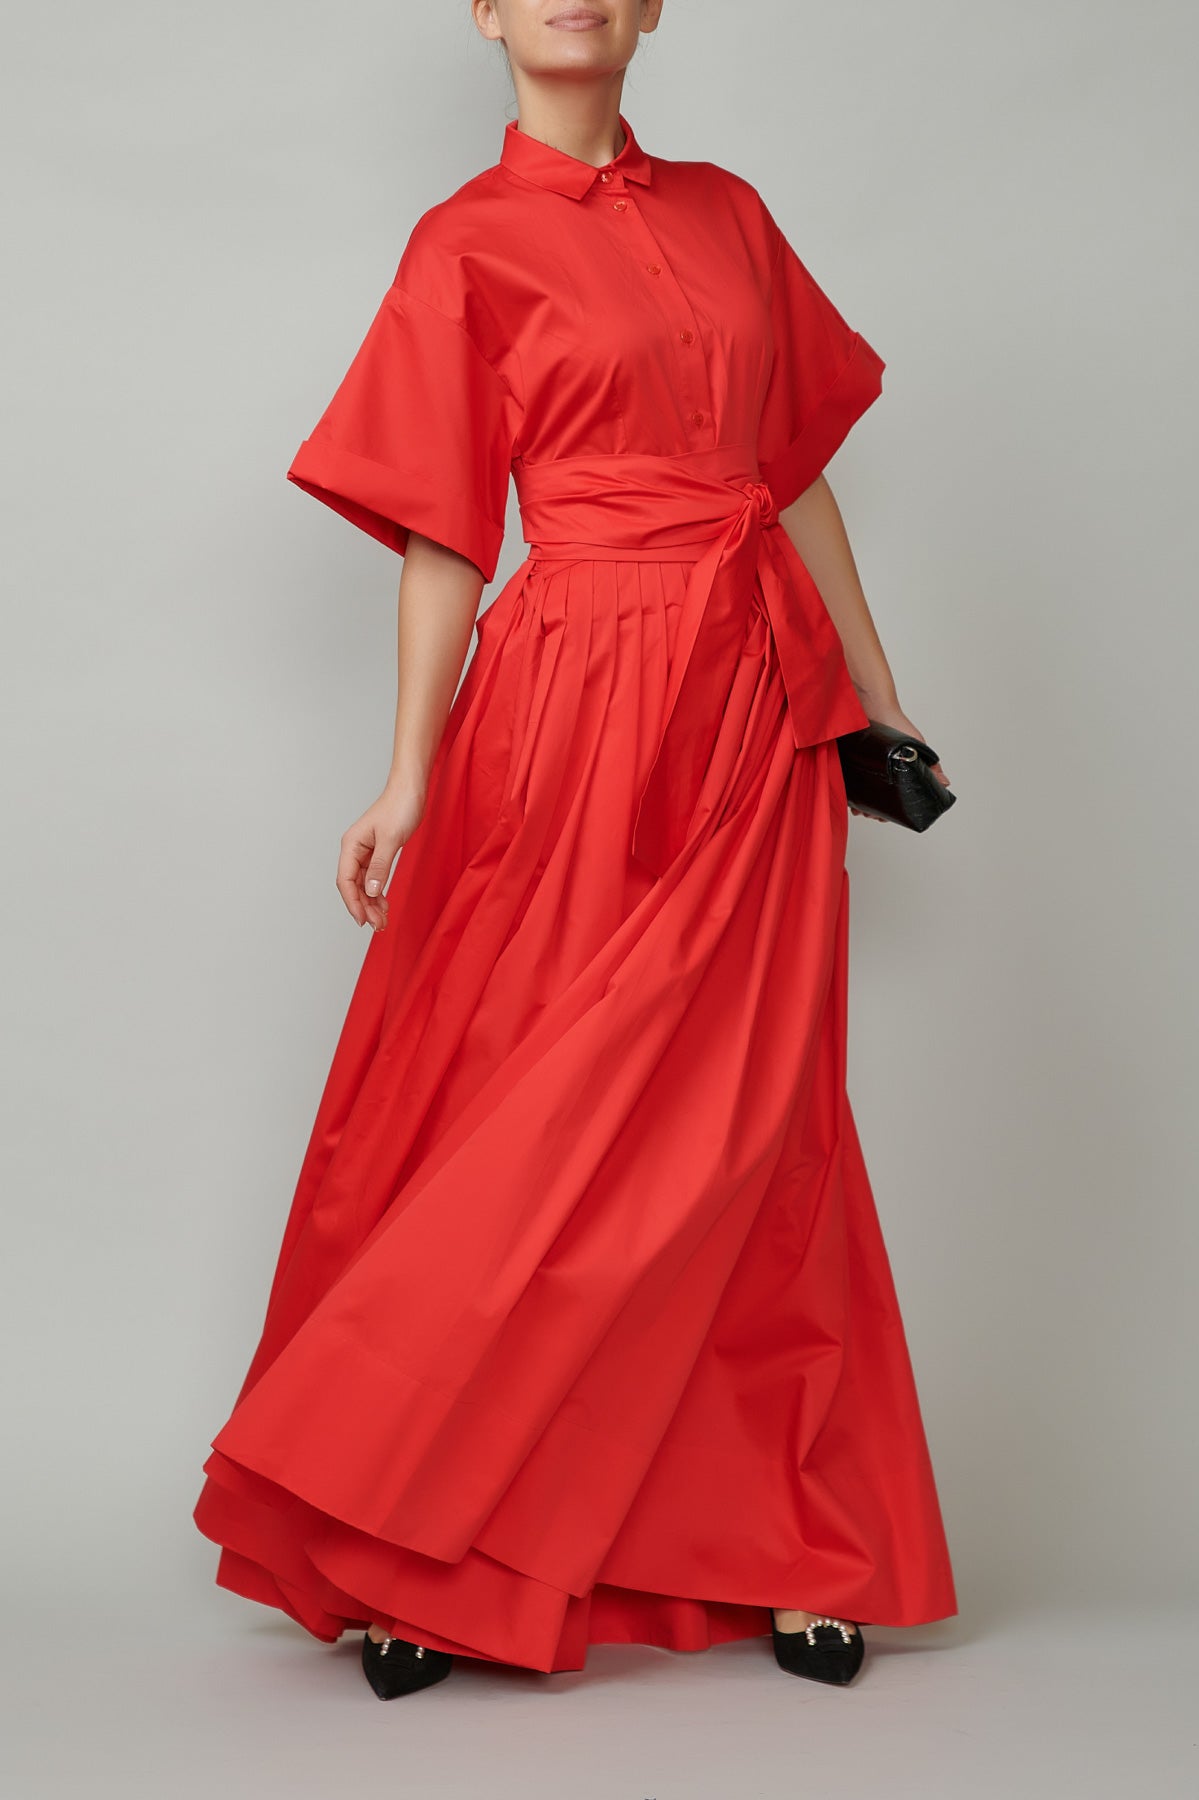 Evening dress, long, made of red cotton